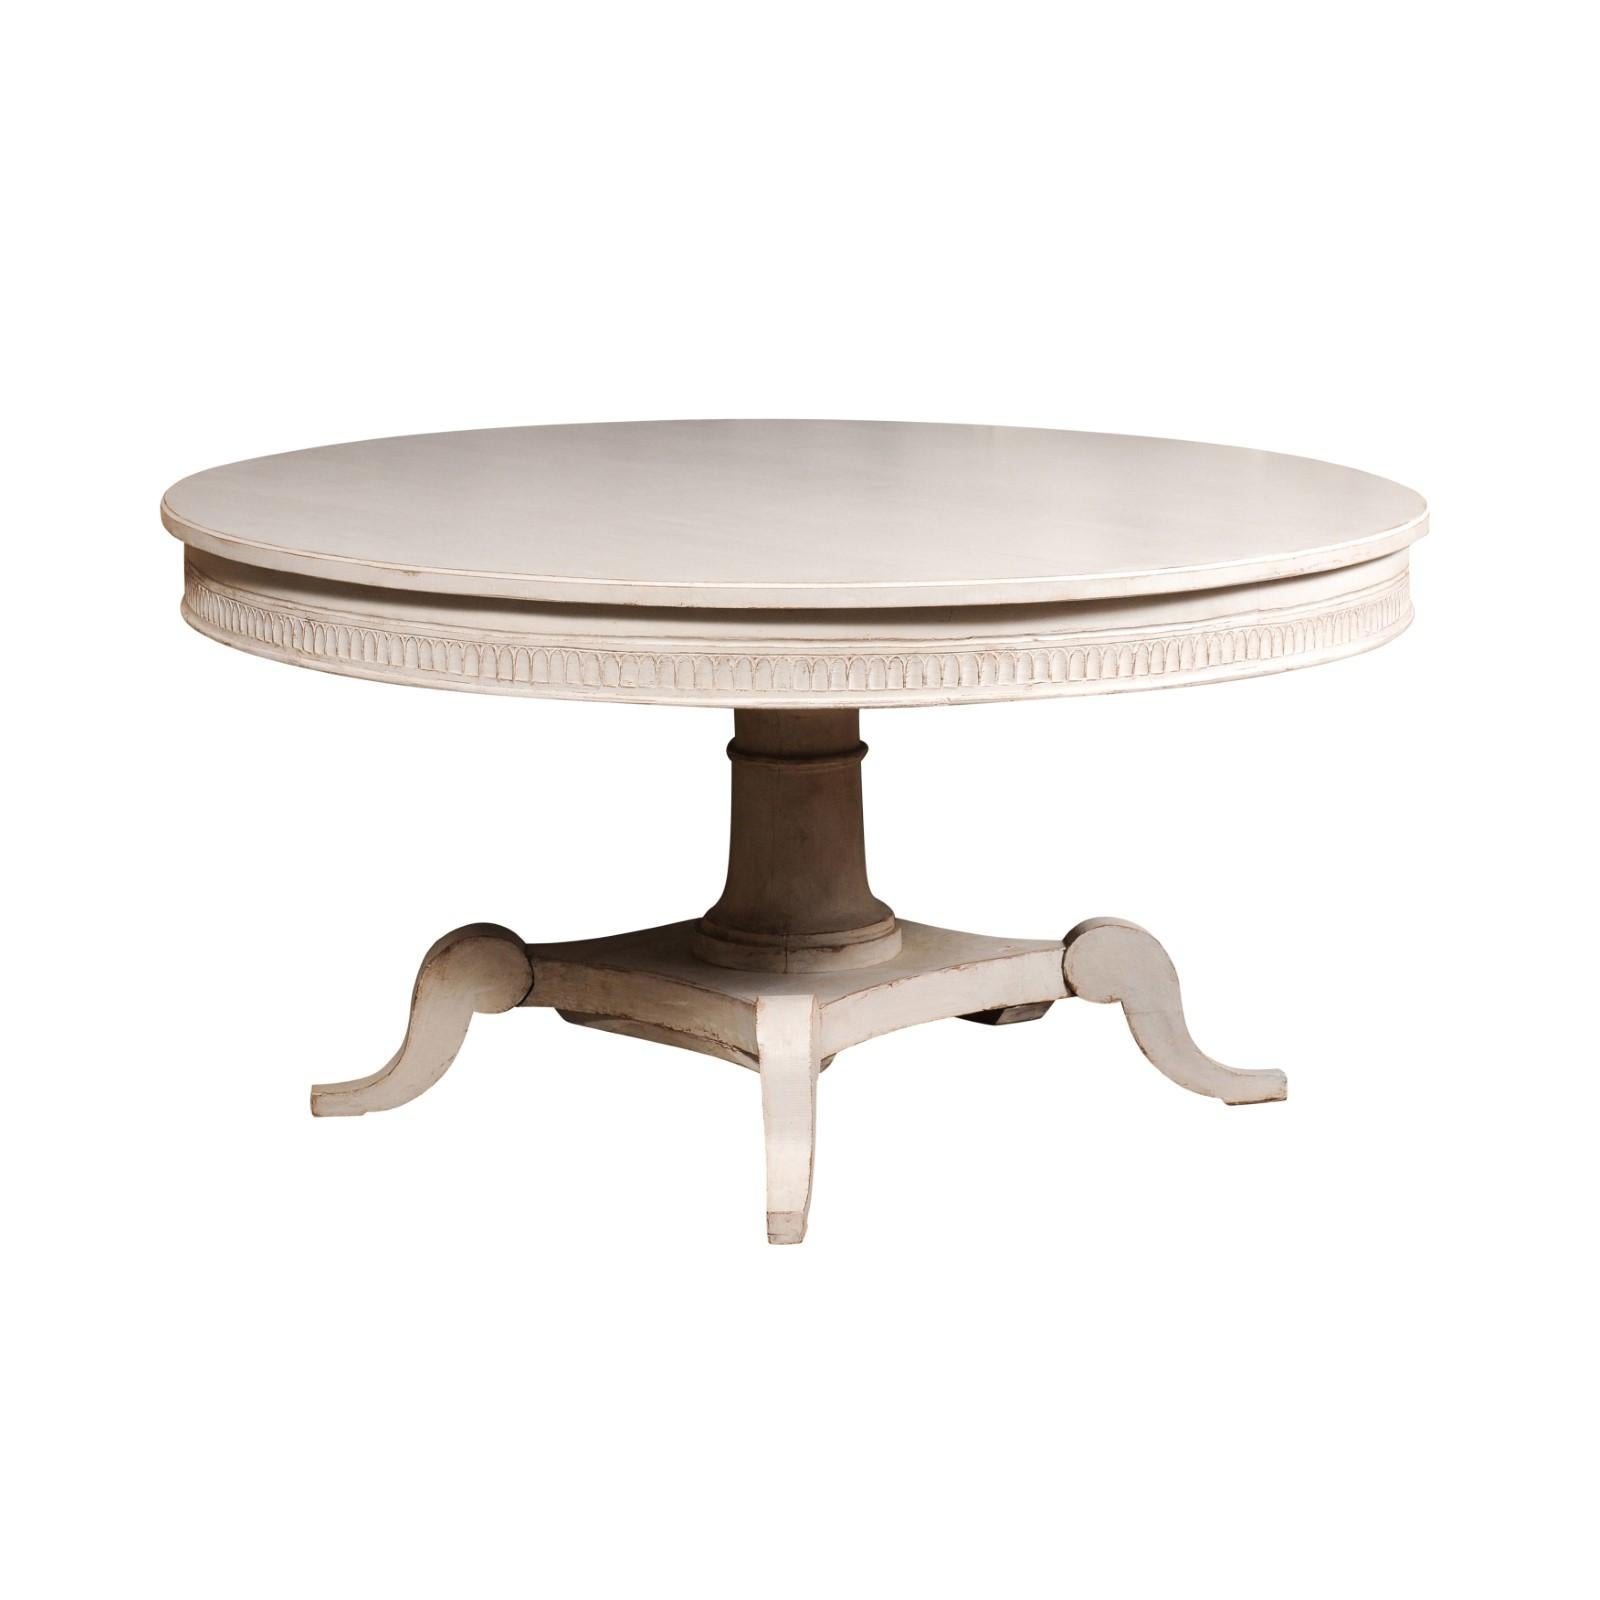 19th Century Swedish Light Gray Painted Round Top Pedestal Table on Carved Base For Sale